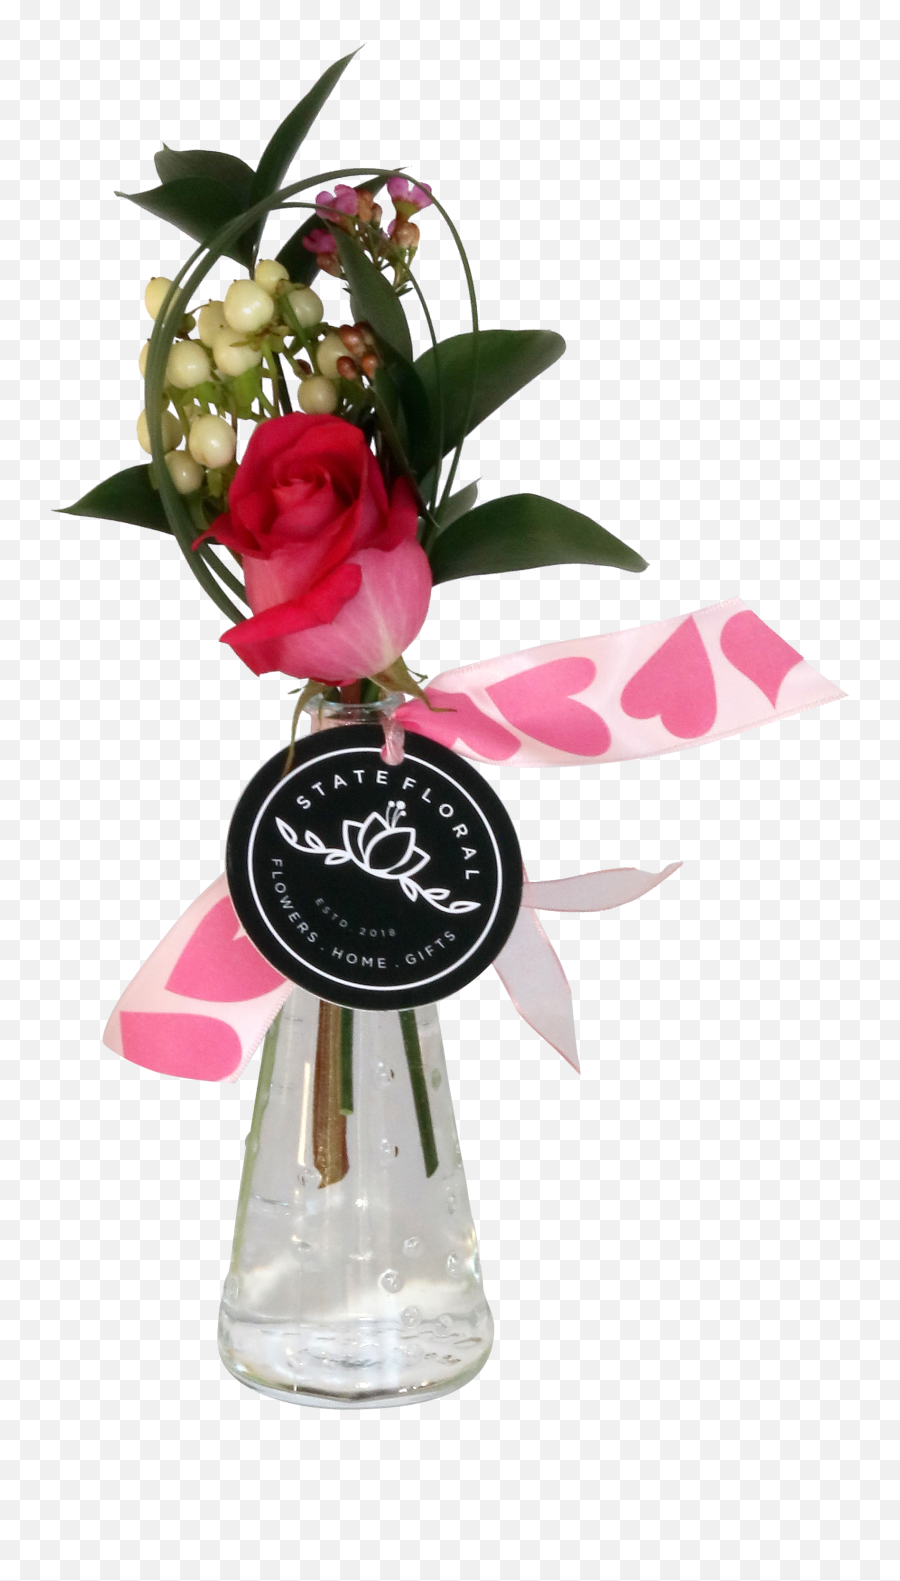 Simply Love - Single Rose In A Bud Vase Starkville Top Emoji,Love Is Not Maximum Emotion. Love Is Maximum Commitment